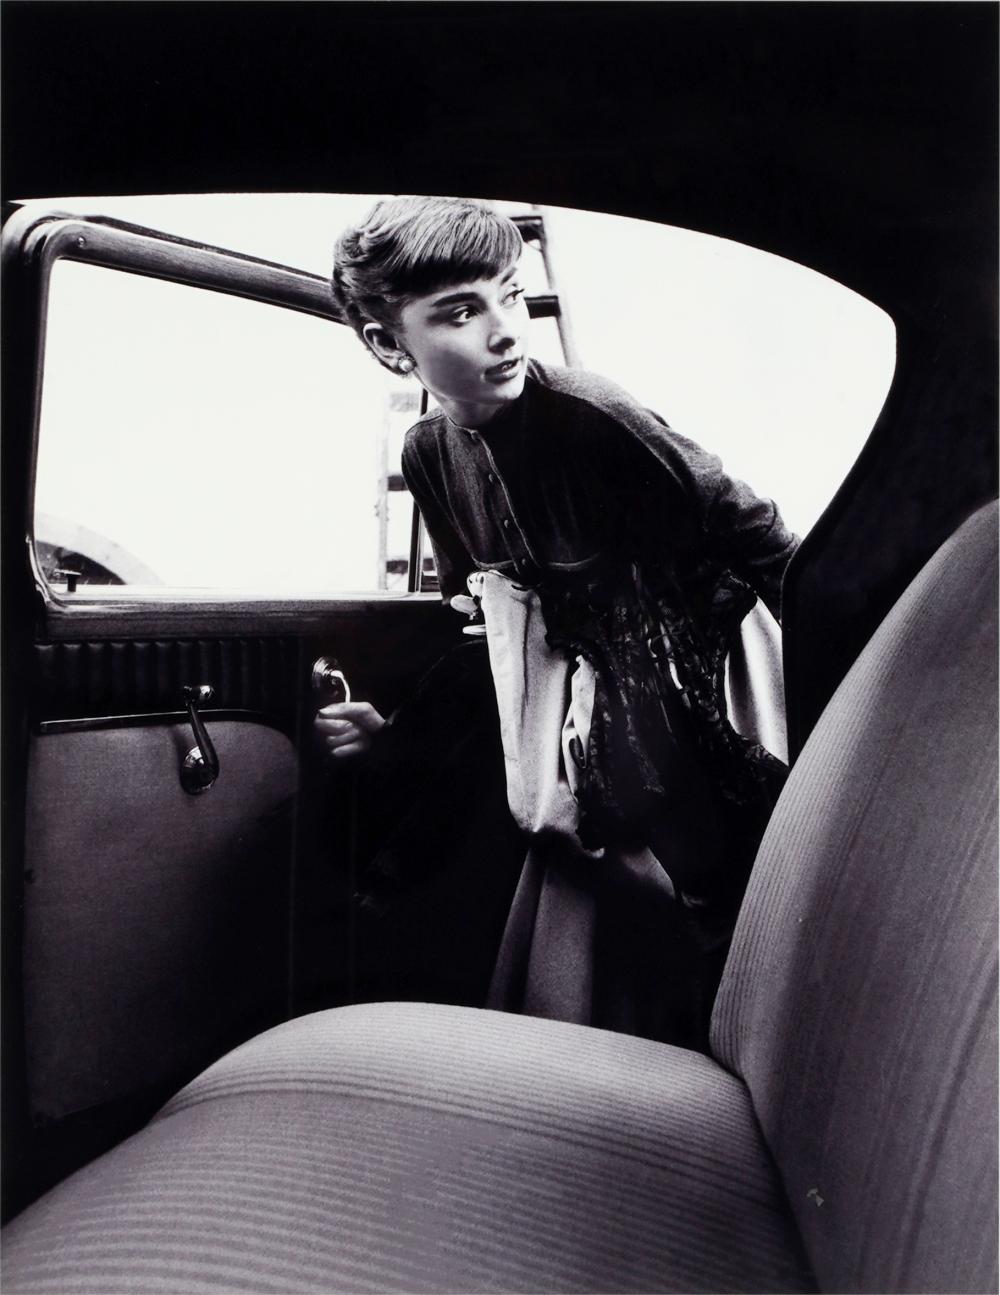 BOB WILLOUGHBY (1927 - 2009): AUDREY